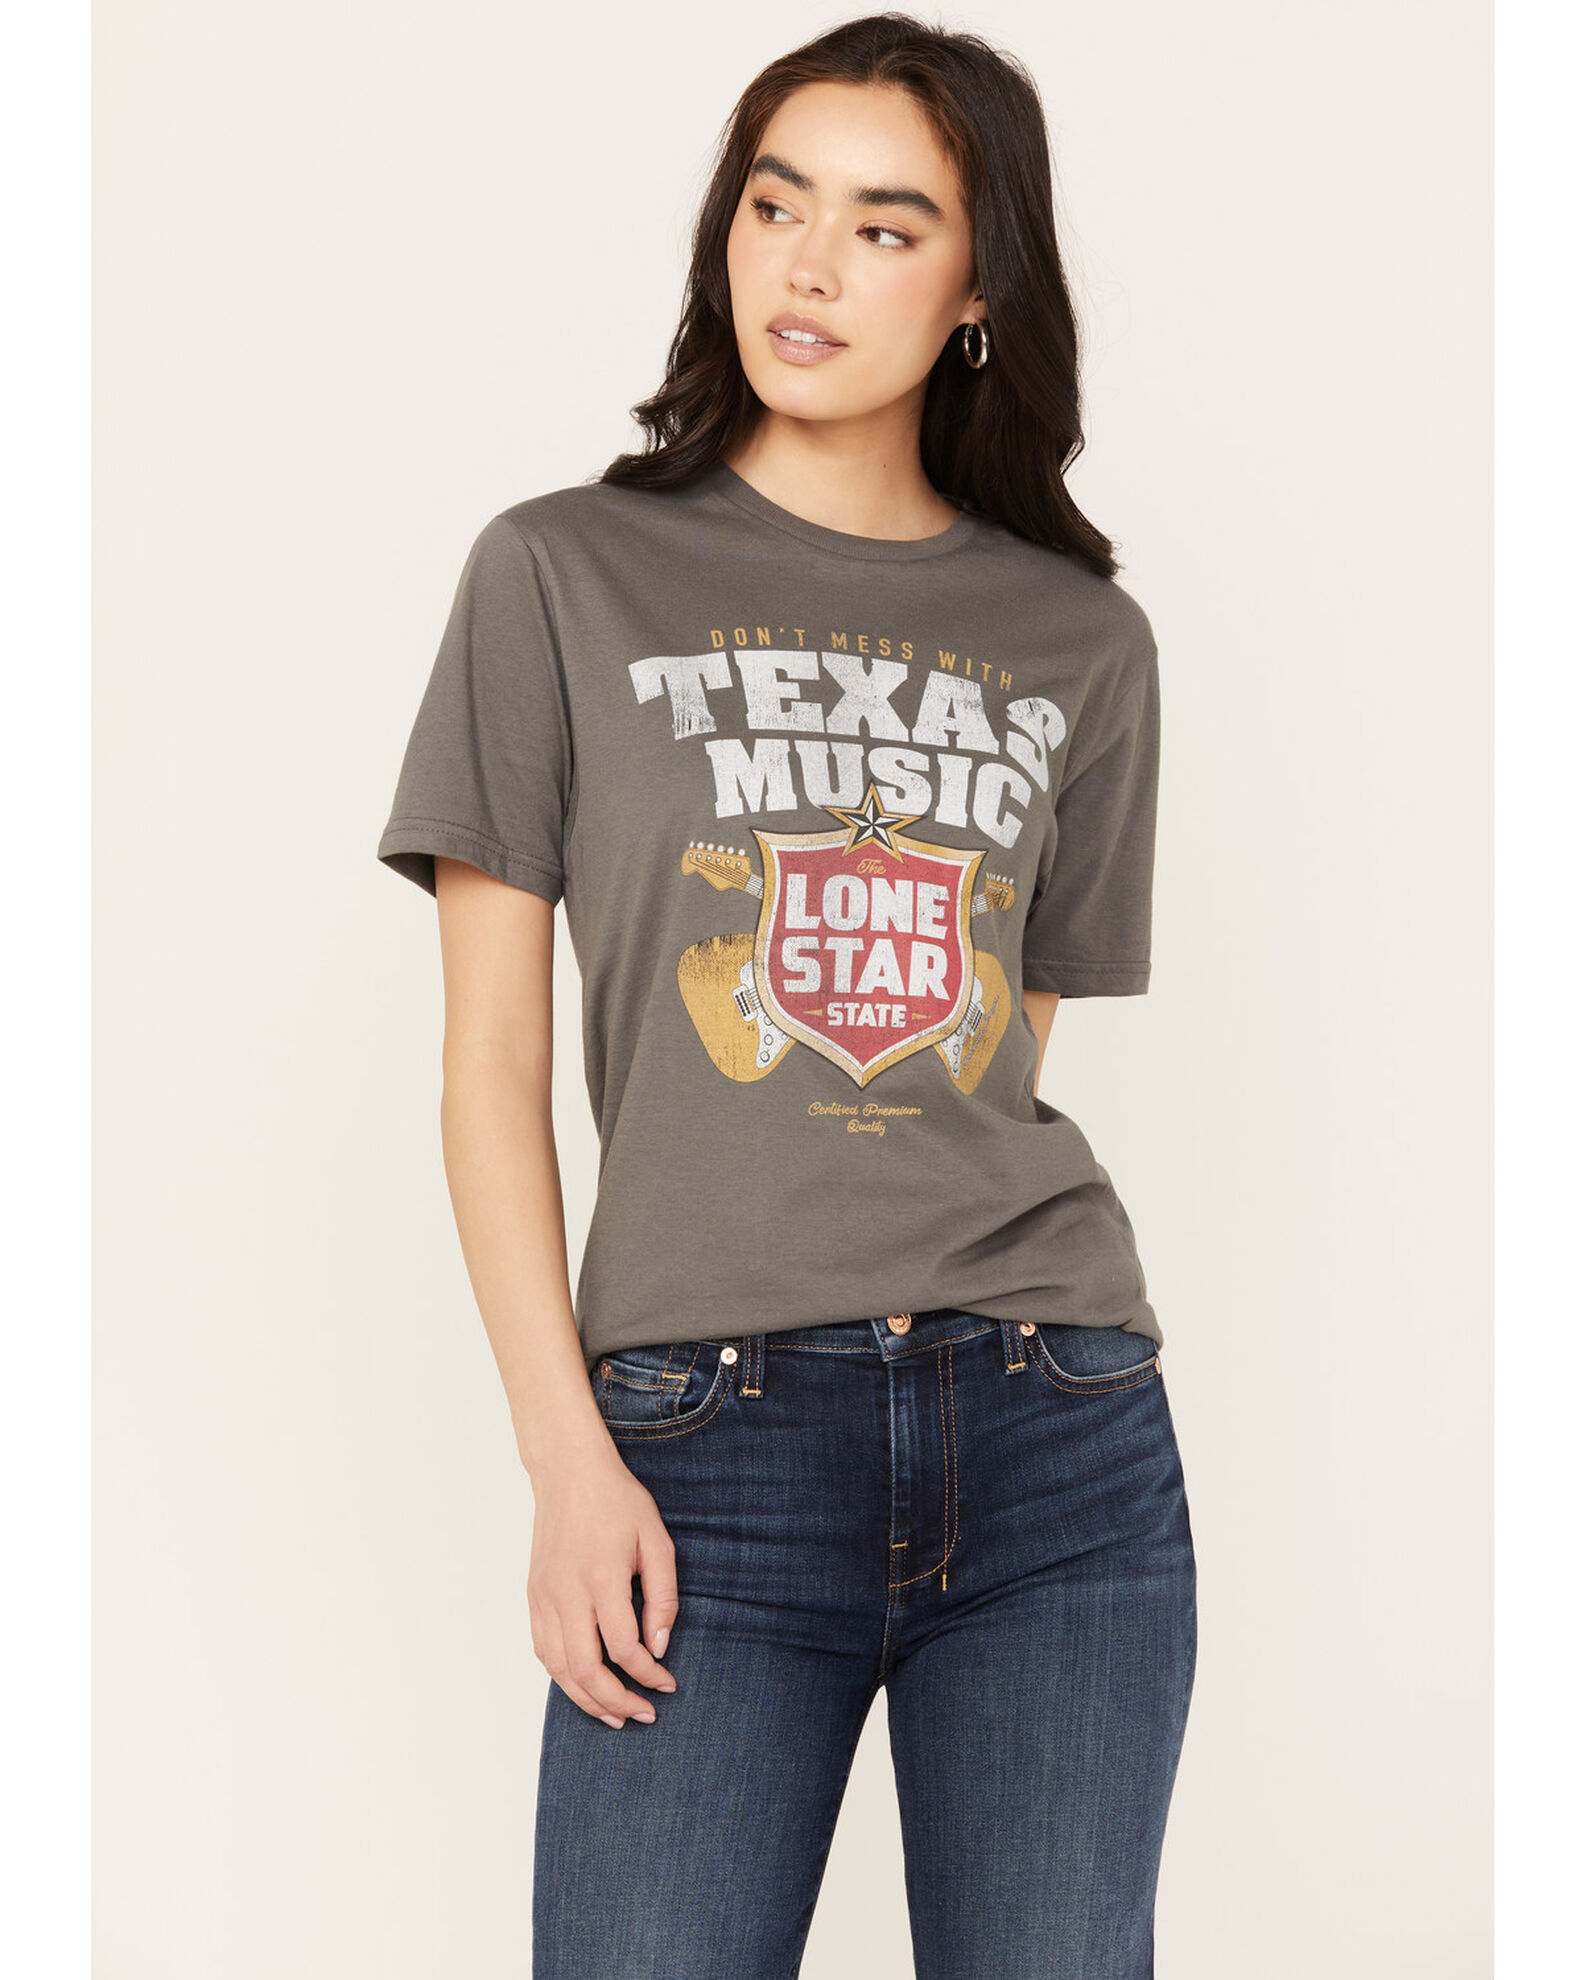 Bohemian Cowgirl Women's Don't Mess With Texas Lone Star Short Sleeve Graphic Tee